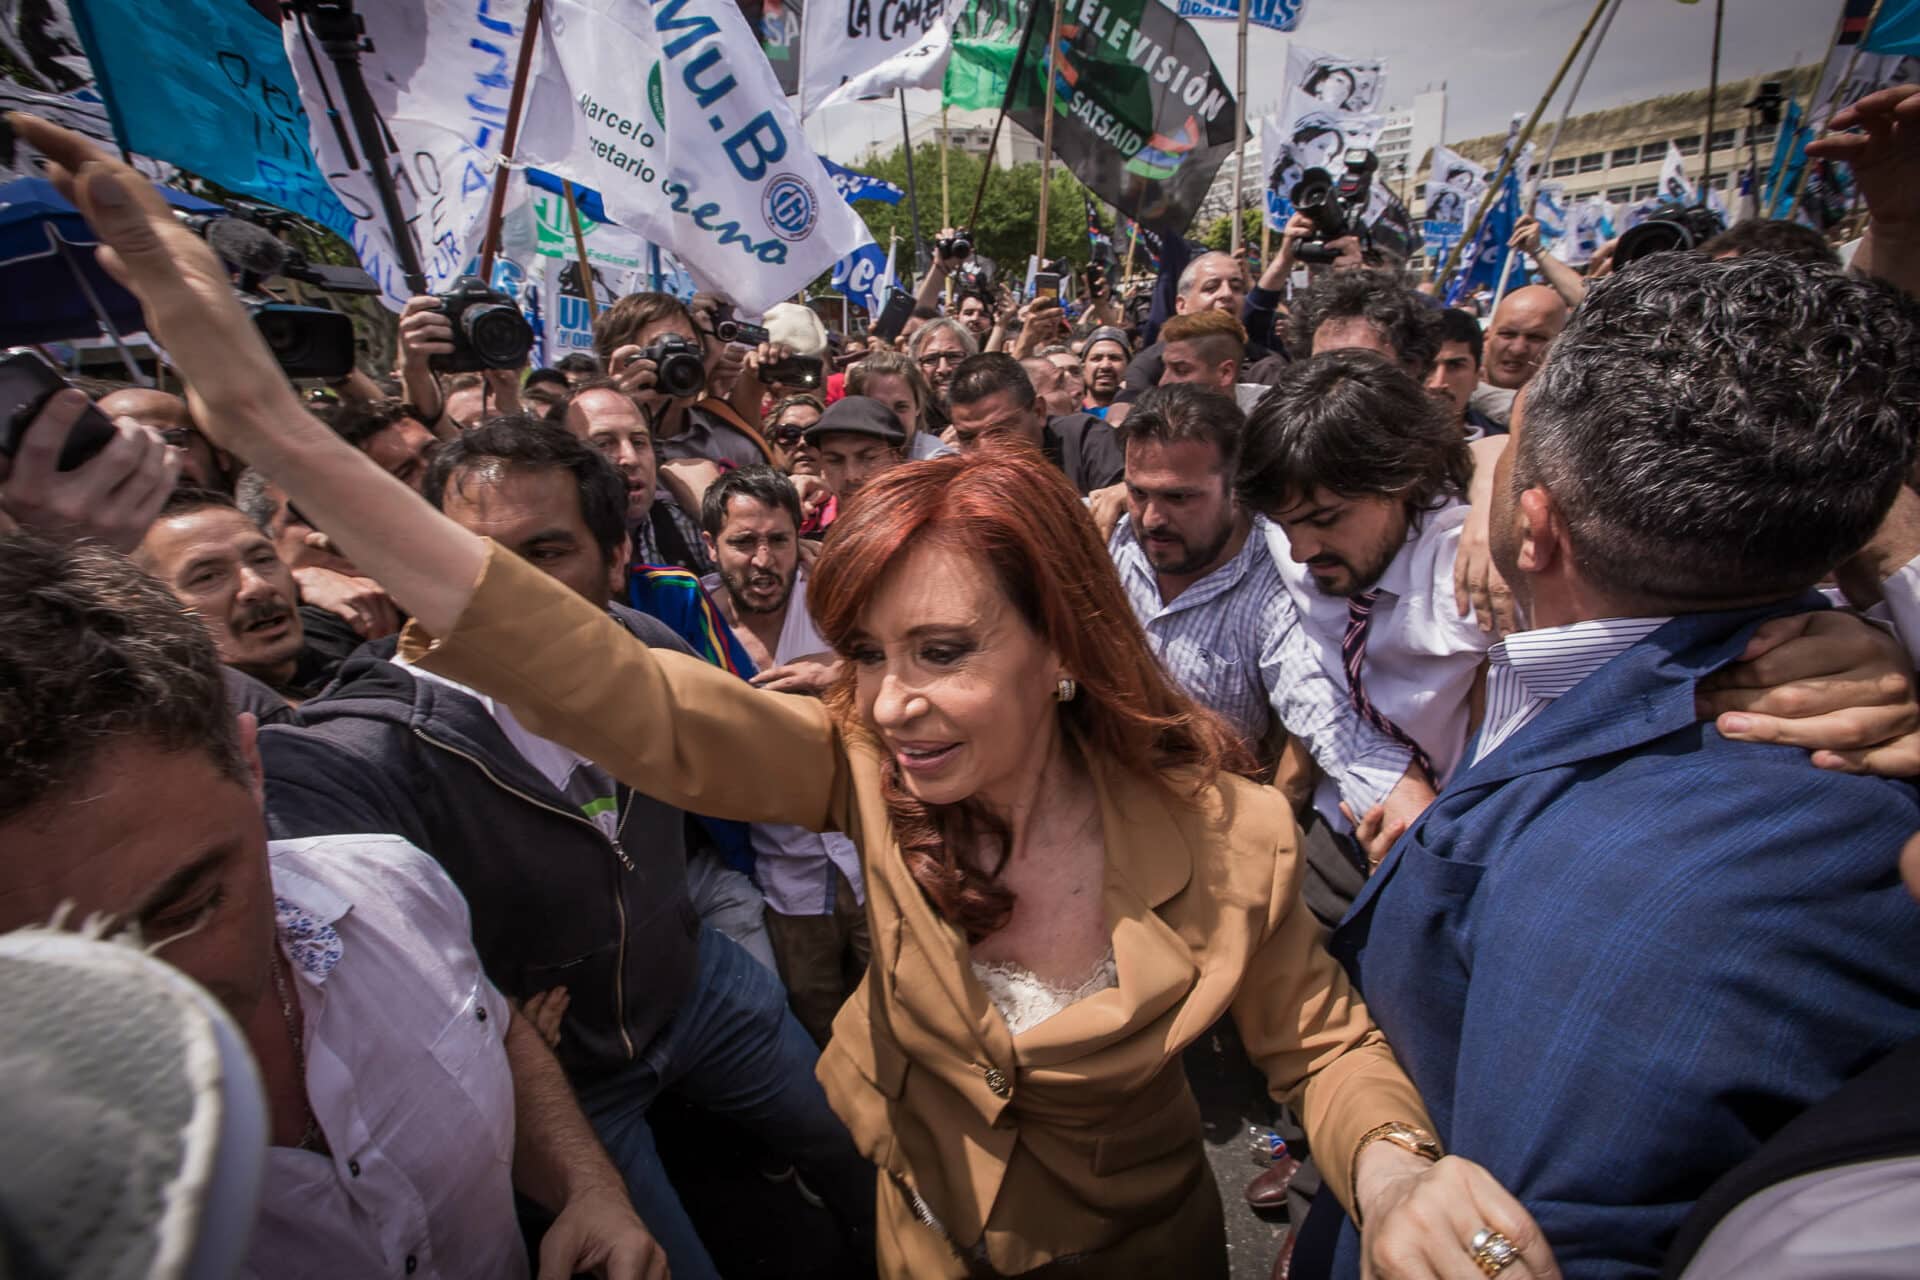 Argentina's Vice President Cristina Fernandez Kirchner surrounded by supporters at a political rally. Photo: Pressenza.com/File photo.